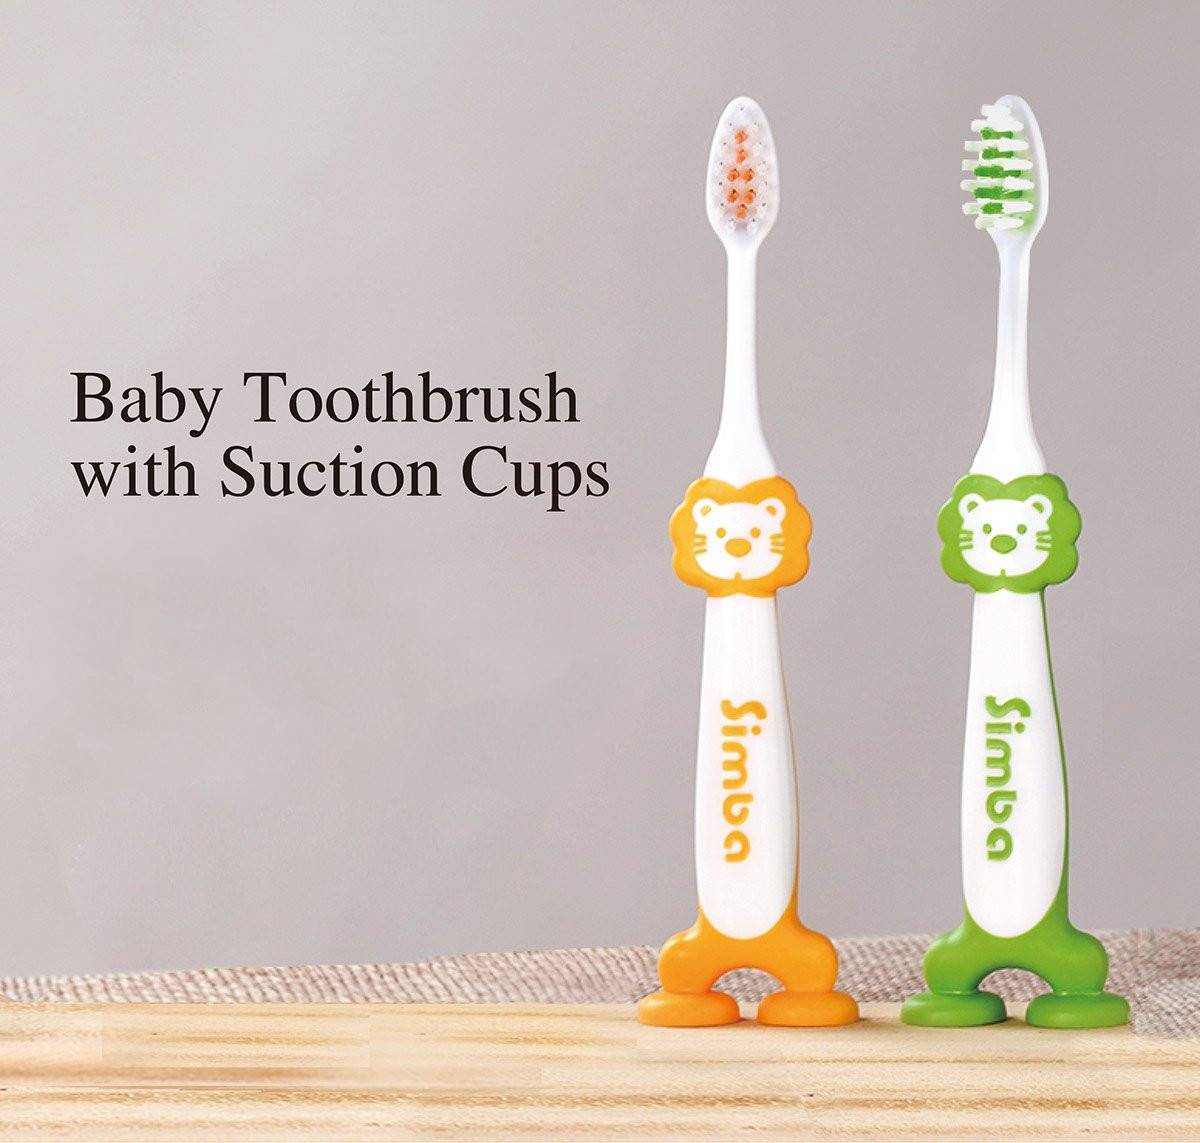 BABY TOOTHBRUSH with SUCTION PADES 3-1200x1143